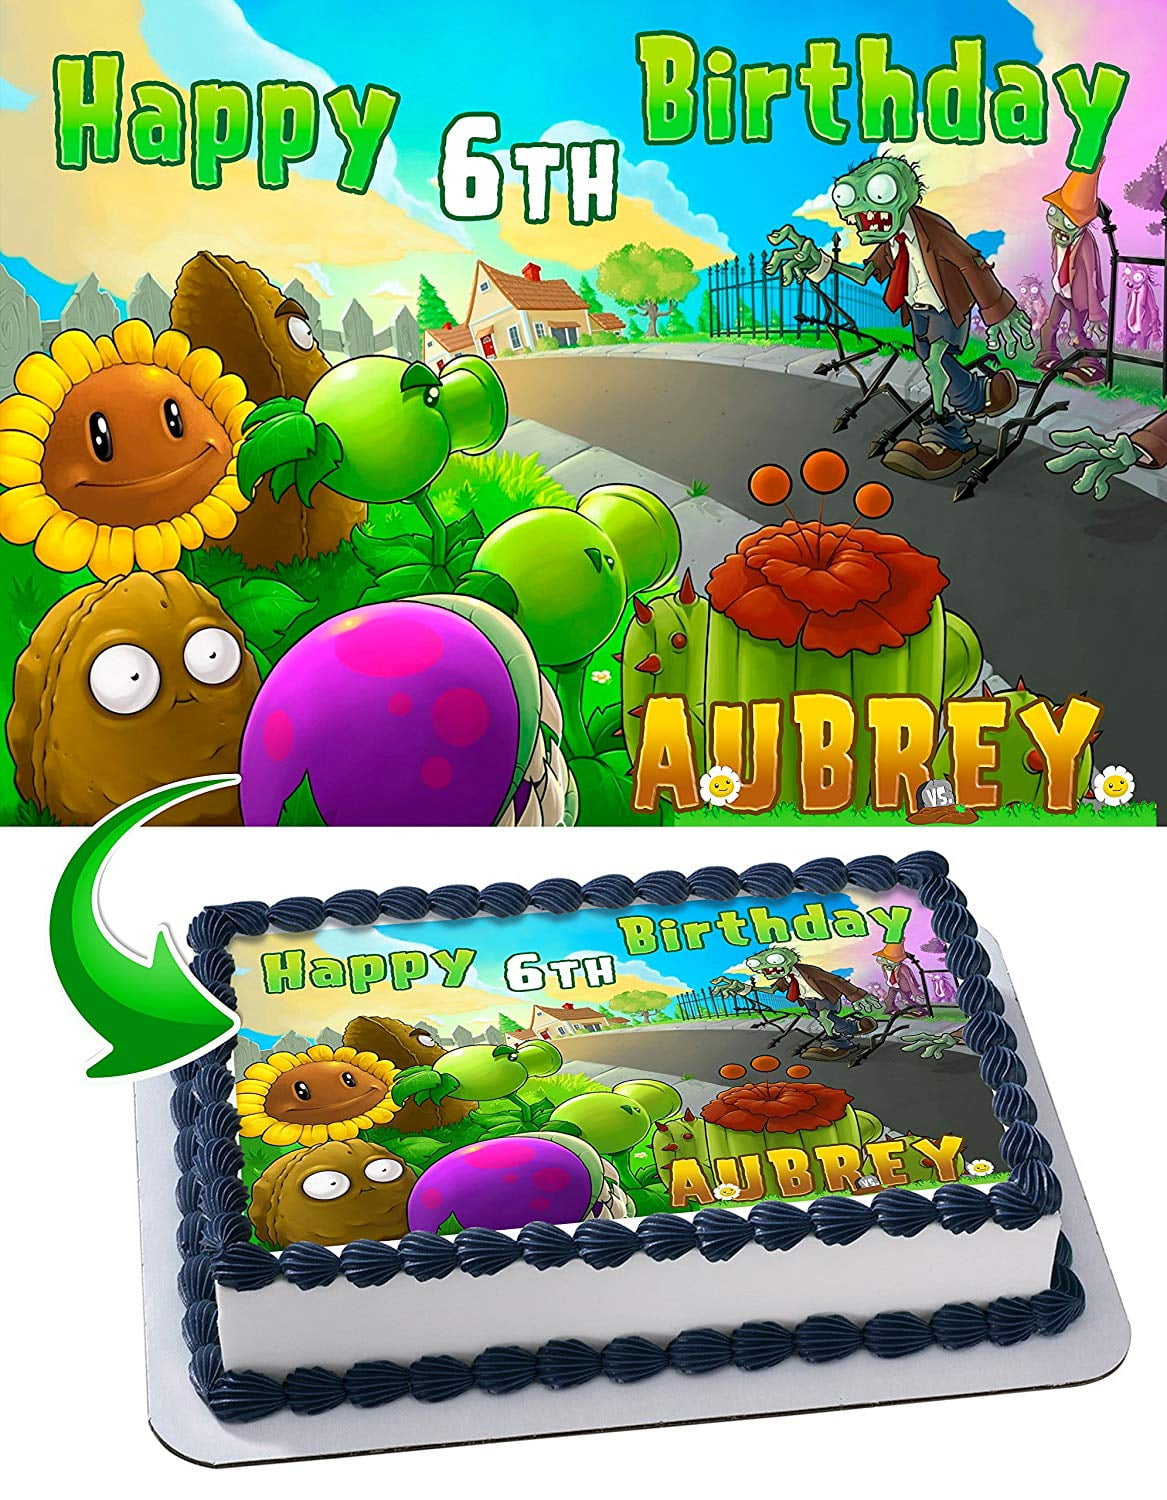 PERSONALISED PLANTS VS.ZOMBIES BIRTHDAY CAKE TOPPER A4 ICING SHEET 10"x8" IMAGE